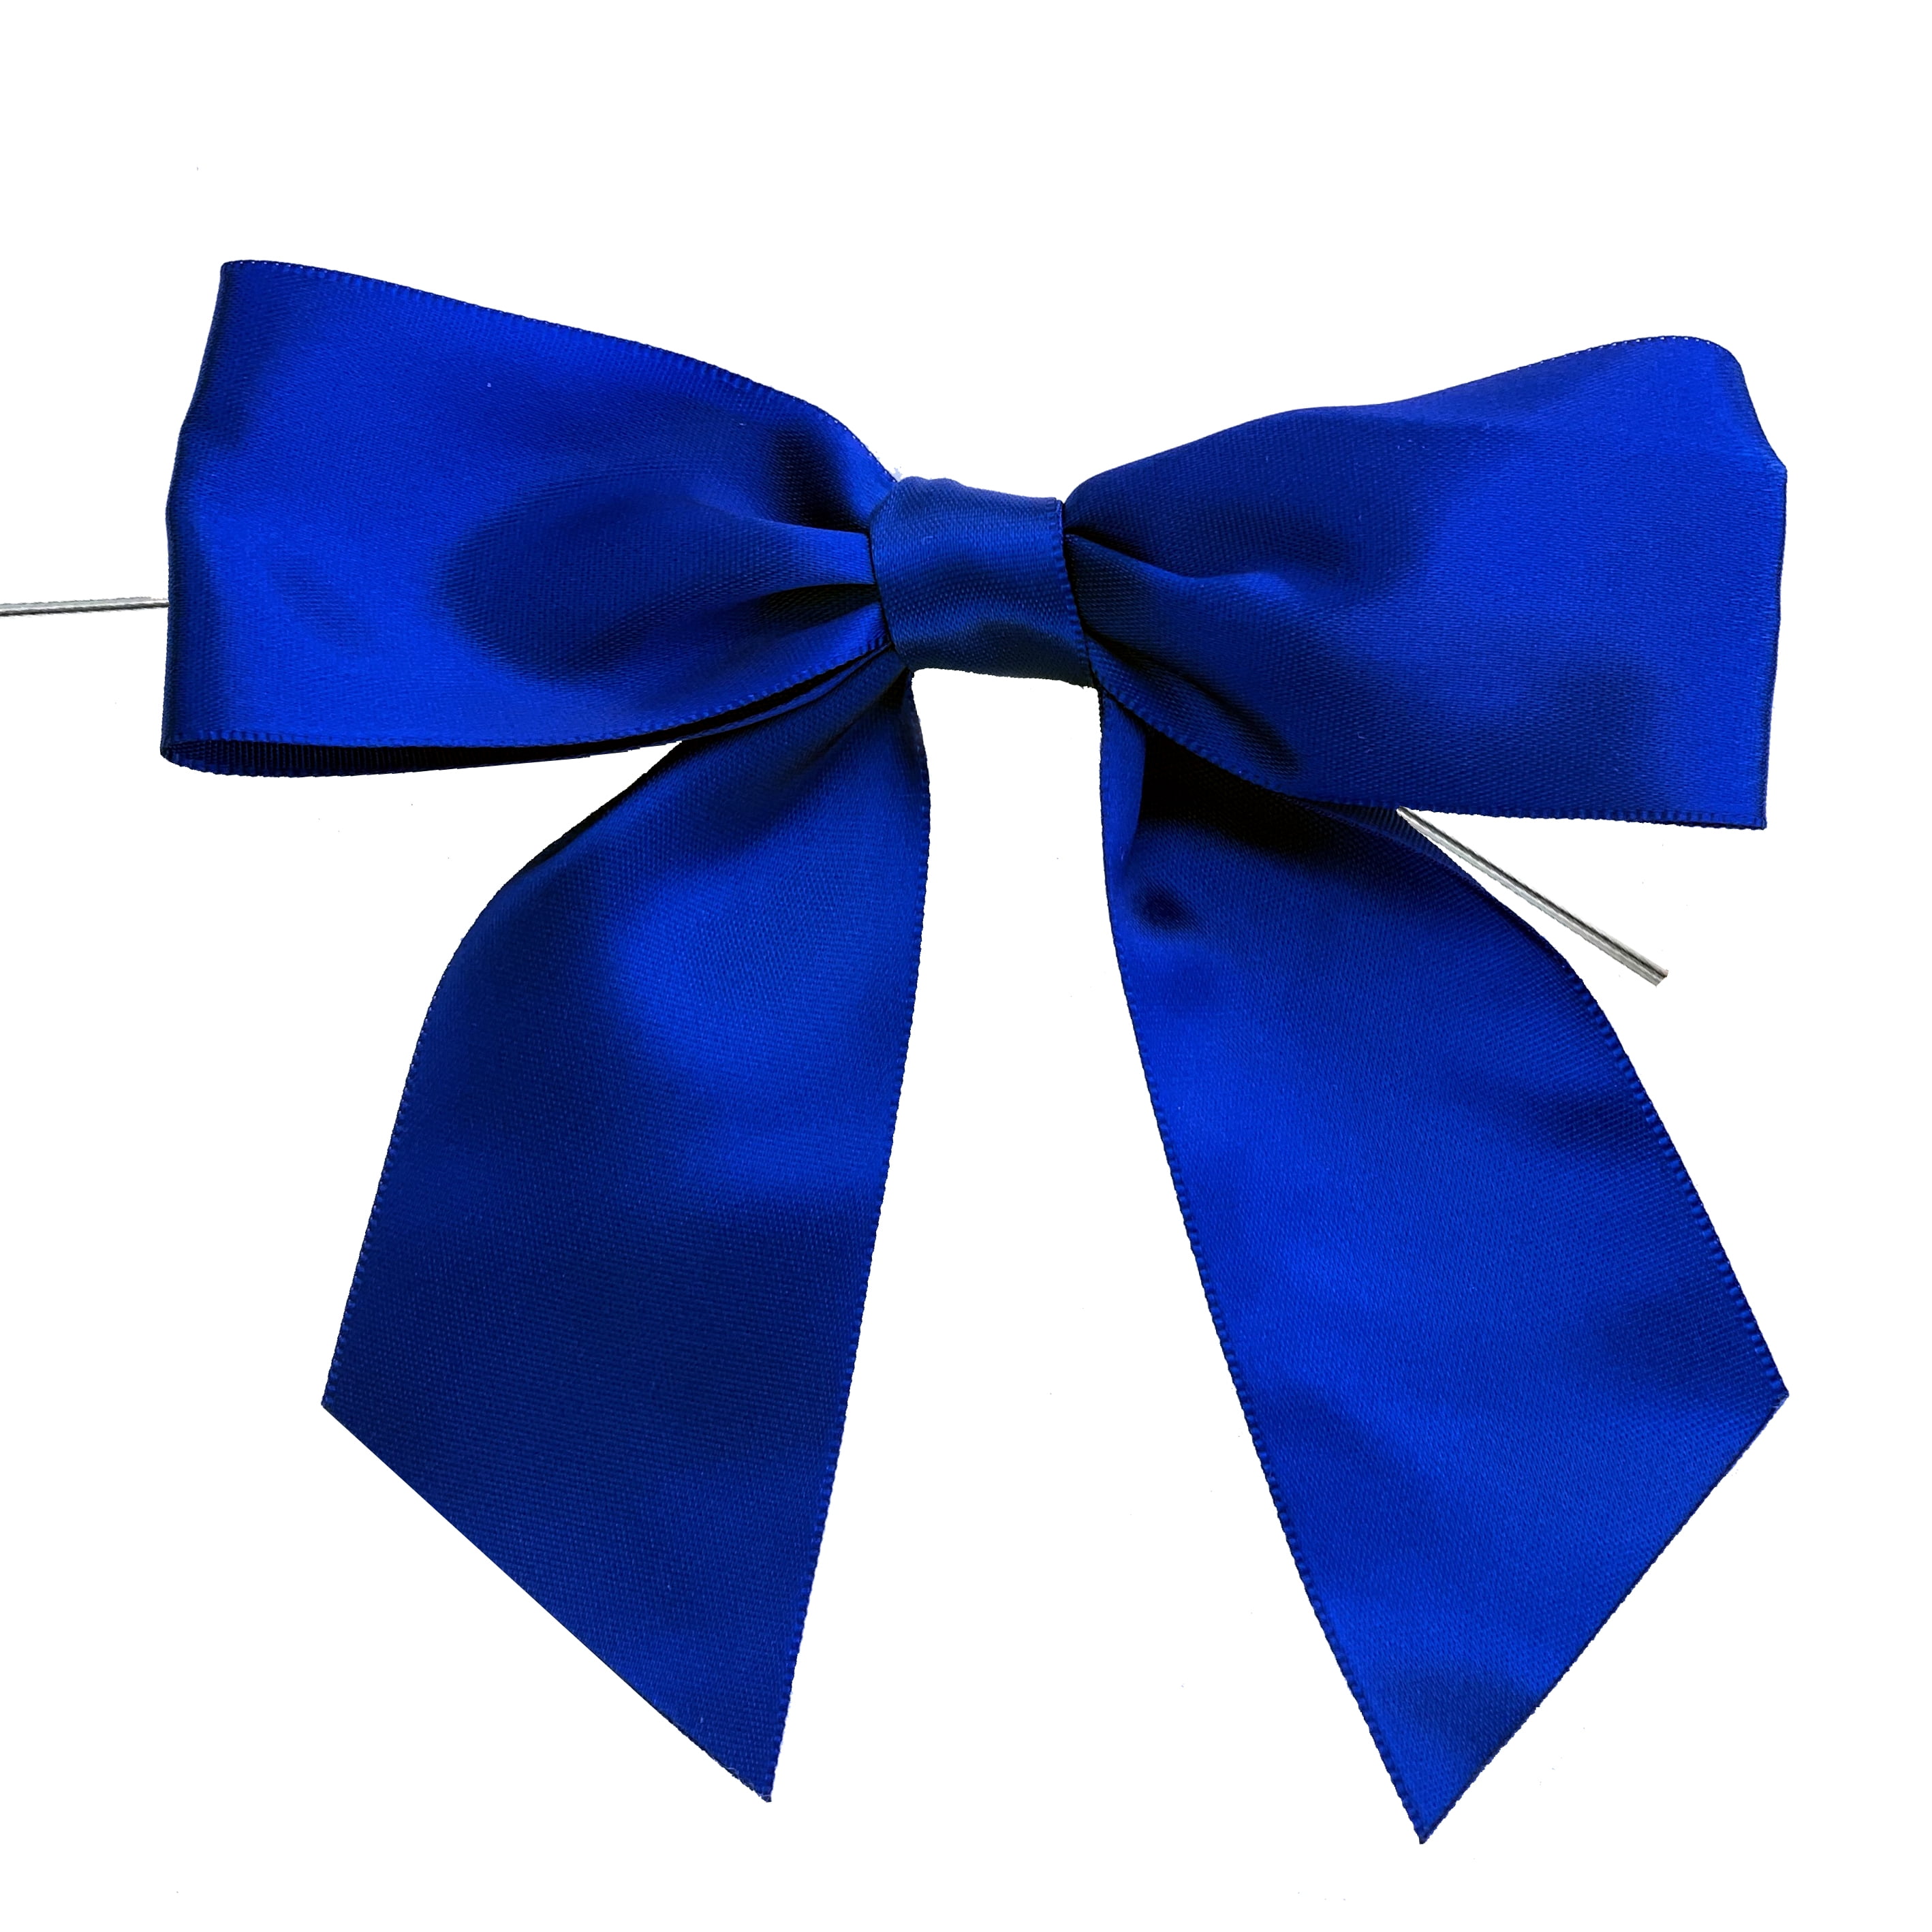 Wired Blue Ribbon, Baby Blue Ribbon, Pastel Blue Ribbon, Light Blue Ribbon  for Wreaths and Bows, 4 X 10 YARD ROLL 